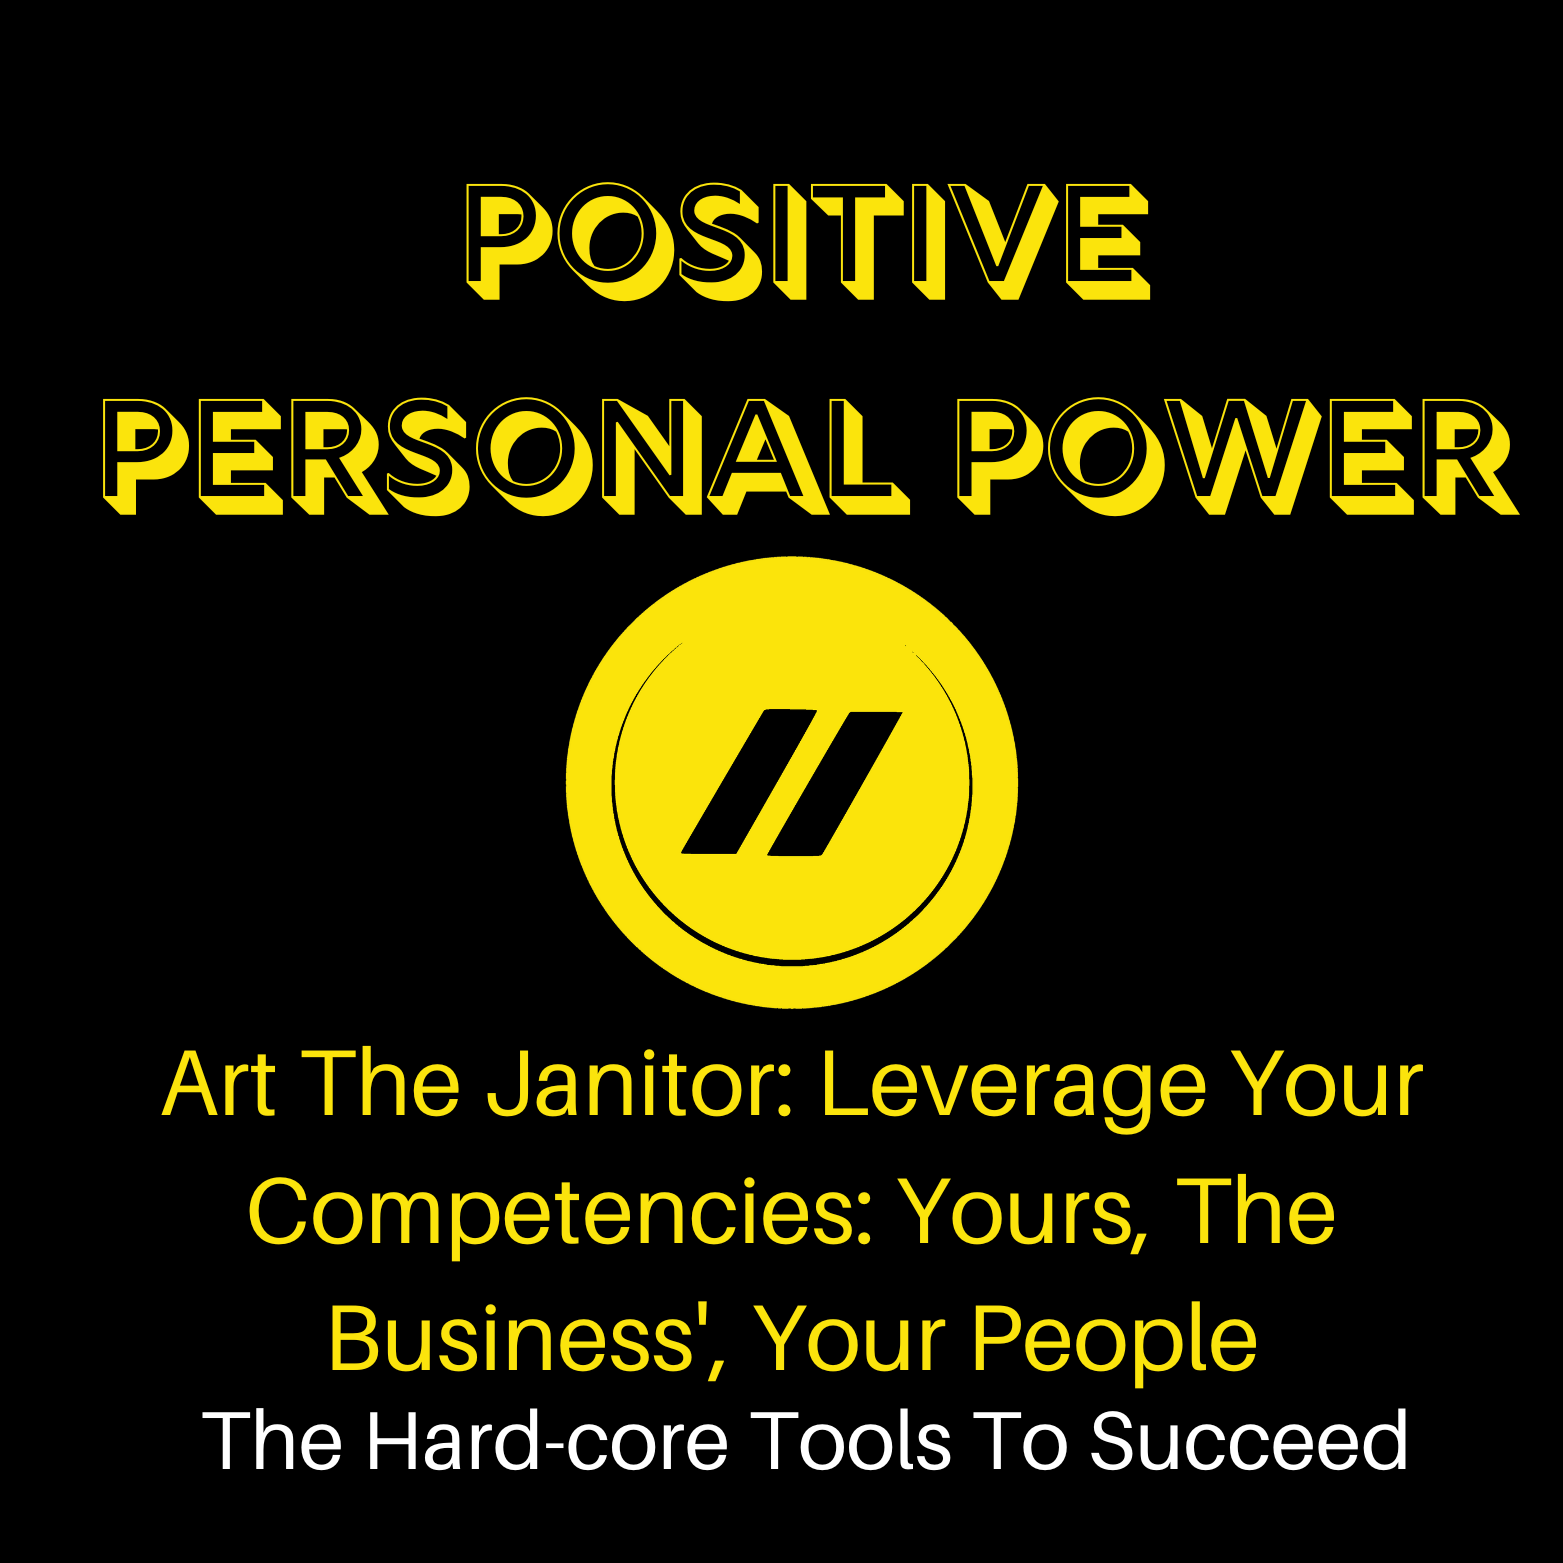 S2 Ep4: Art The Janitor: Leverage Your Competencies: Yours, The Business', Your People